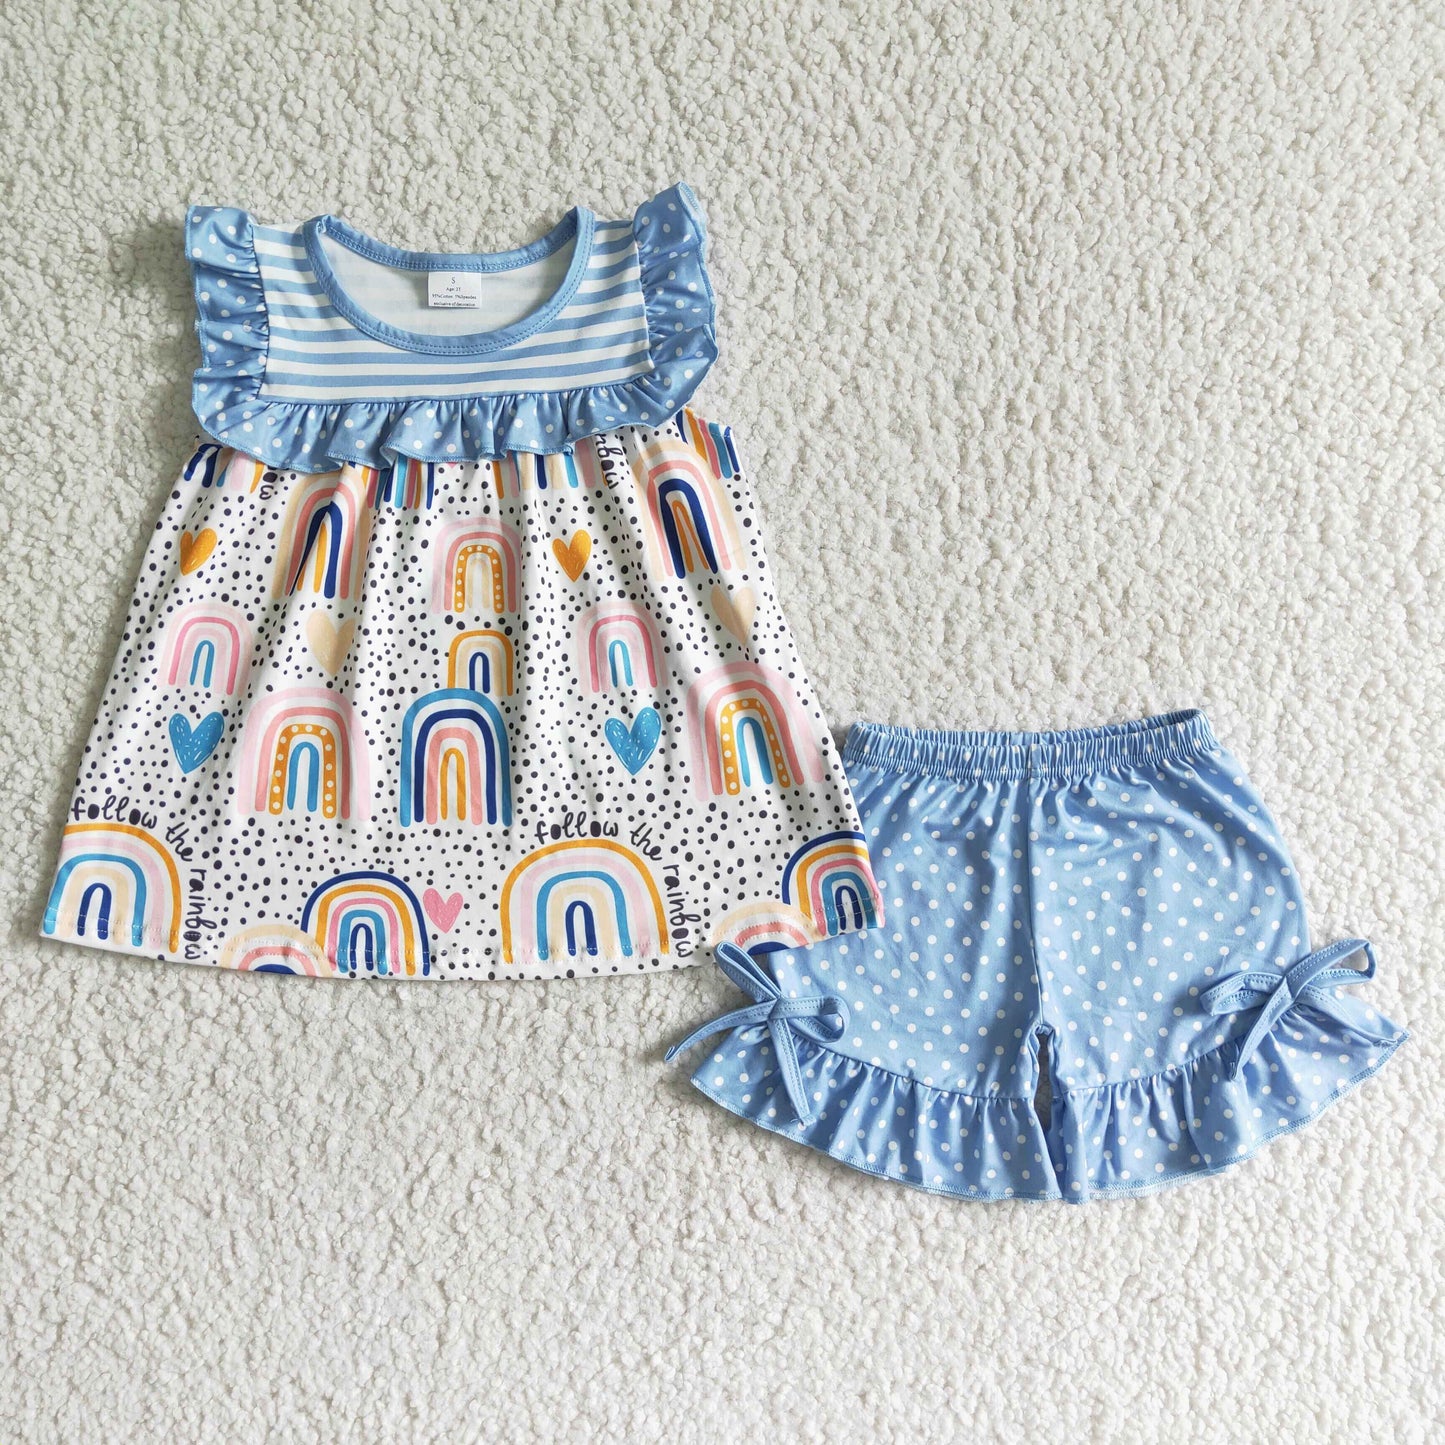 kids clothing girl's outfit blue rainbow shorts set